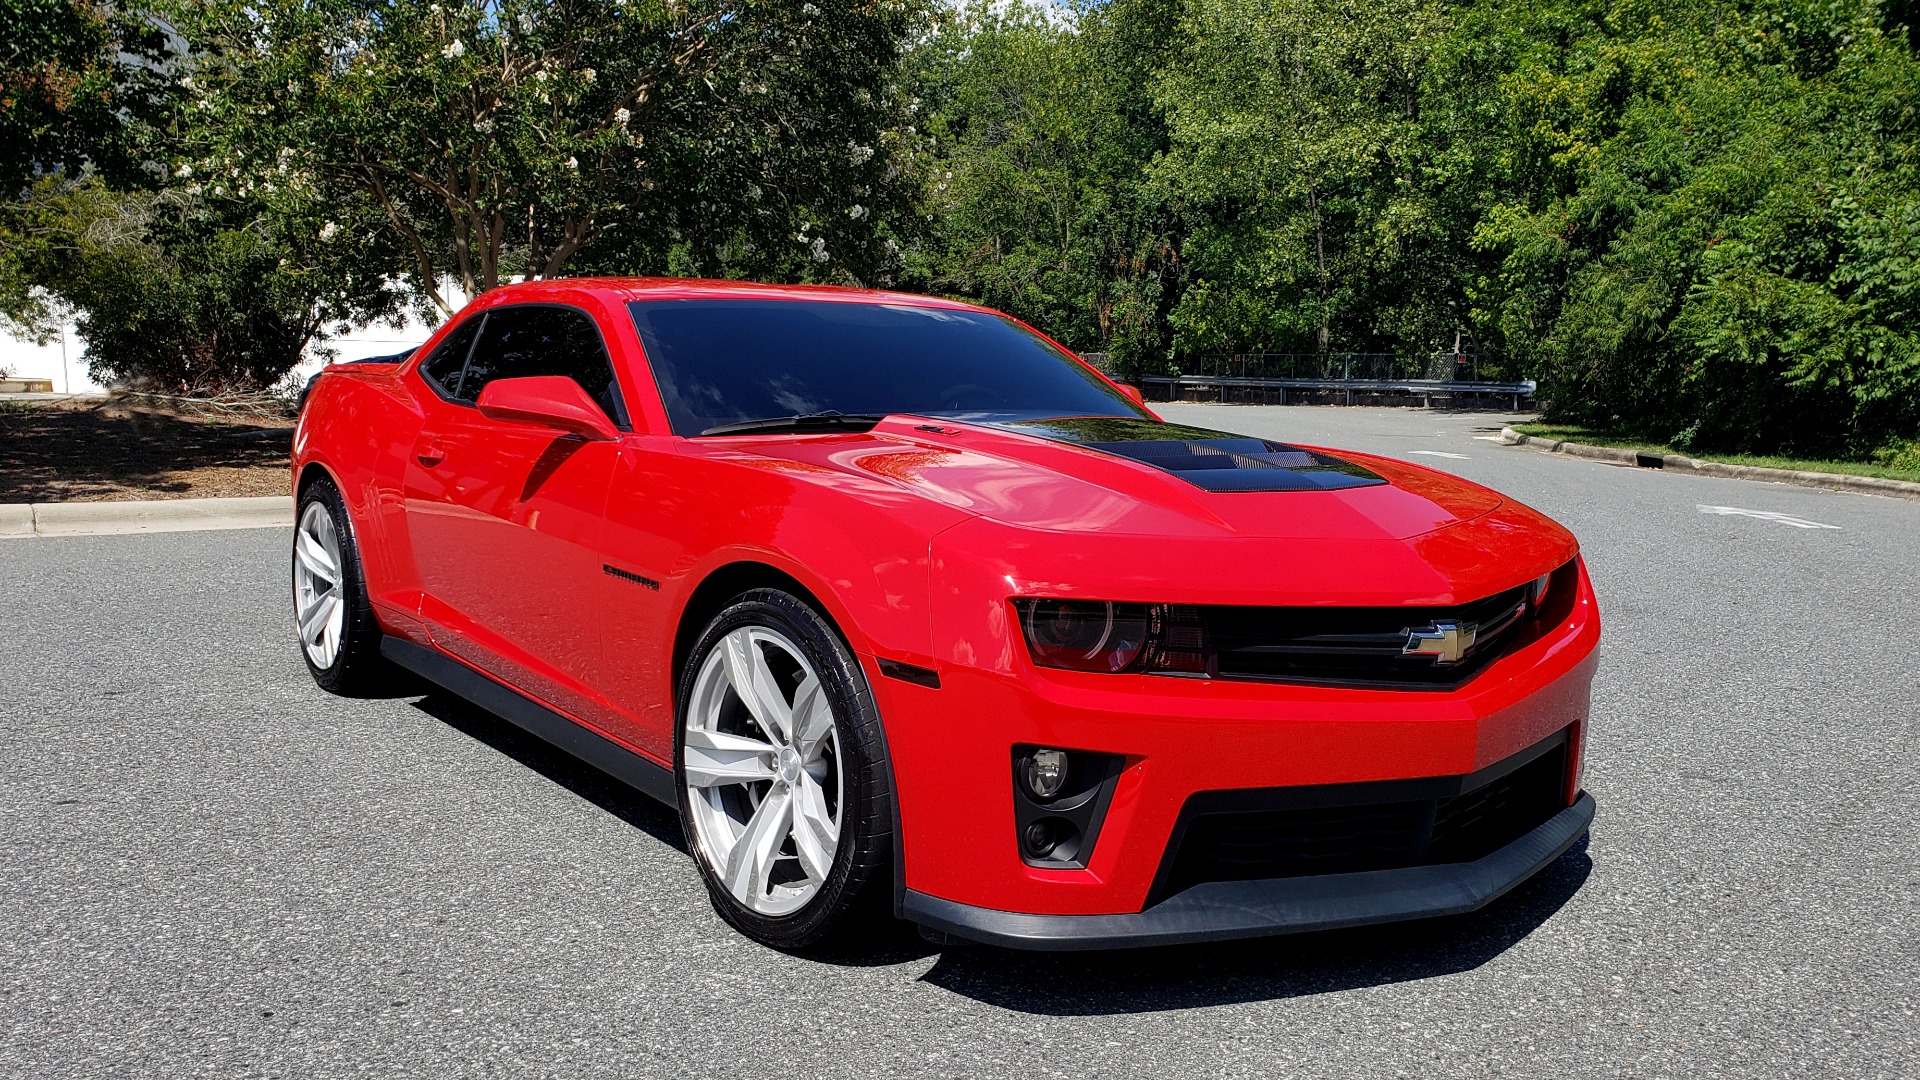 Used 2013 Chevrolet CAMARO ZL1 / 6.2L SUPERCHARGED 580HP / 6-SPD AUTO / NAV / REARVIEW for sale Sold at Formula Imports in Charlotte NC 28227 5